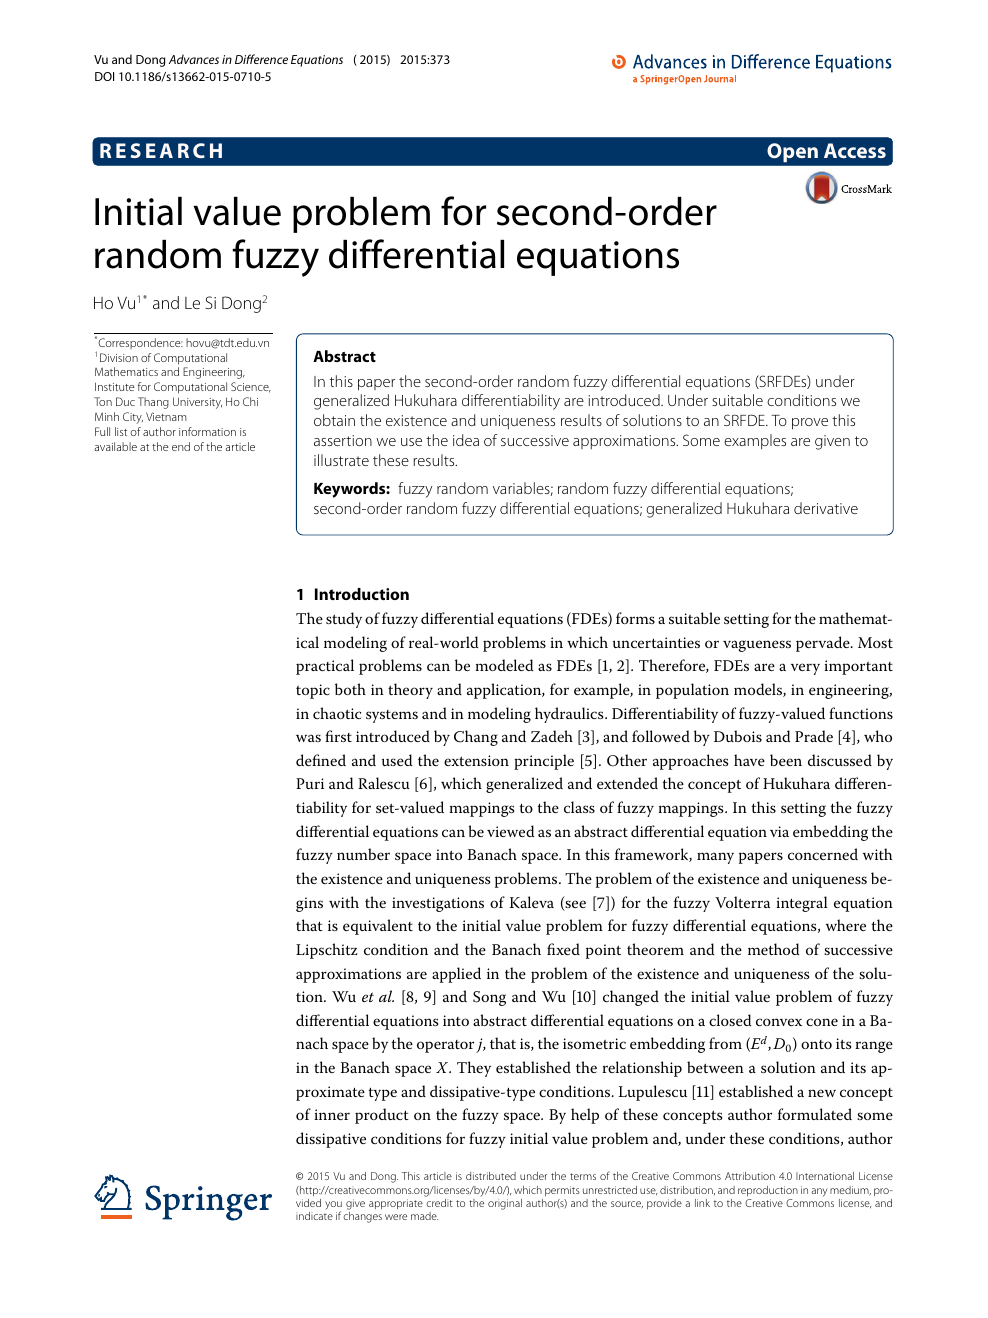 Initial Value Problem For Second Order Random Fuzzy Differential Equations Topic Of Research Paper In Mathematics Download Scholarly Article Pdf And Read For Free On Cyberleninka Open Science Hub